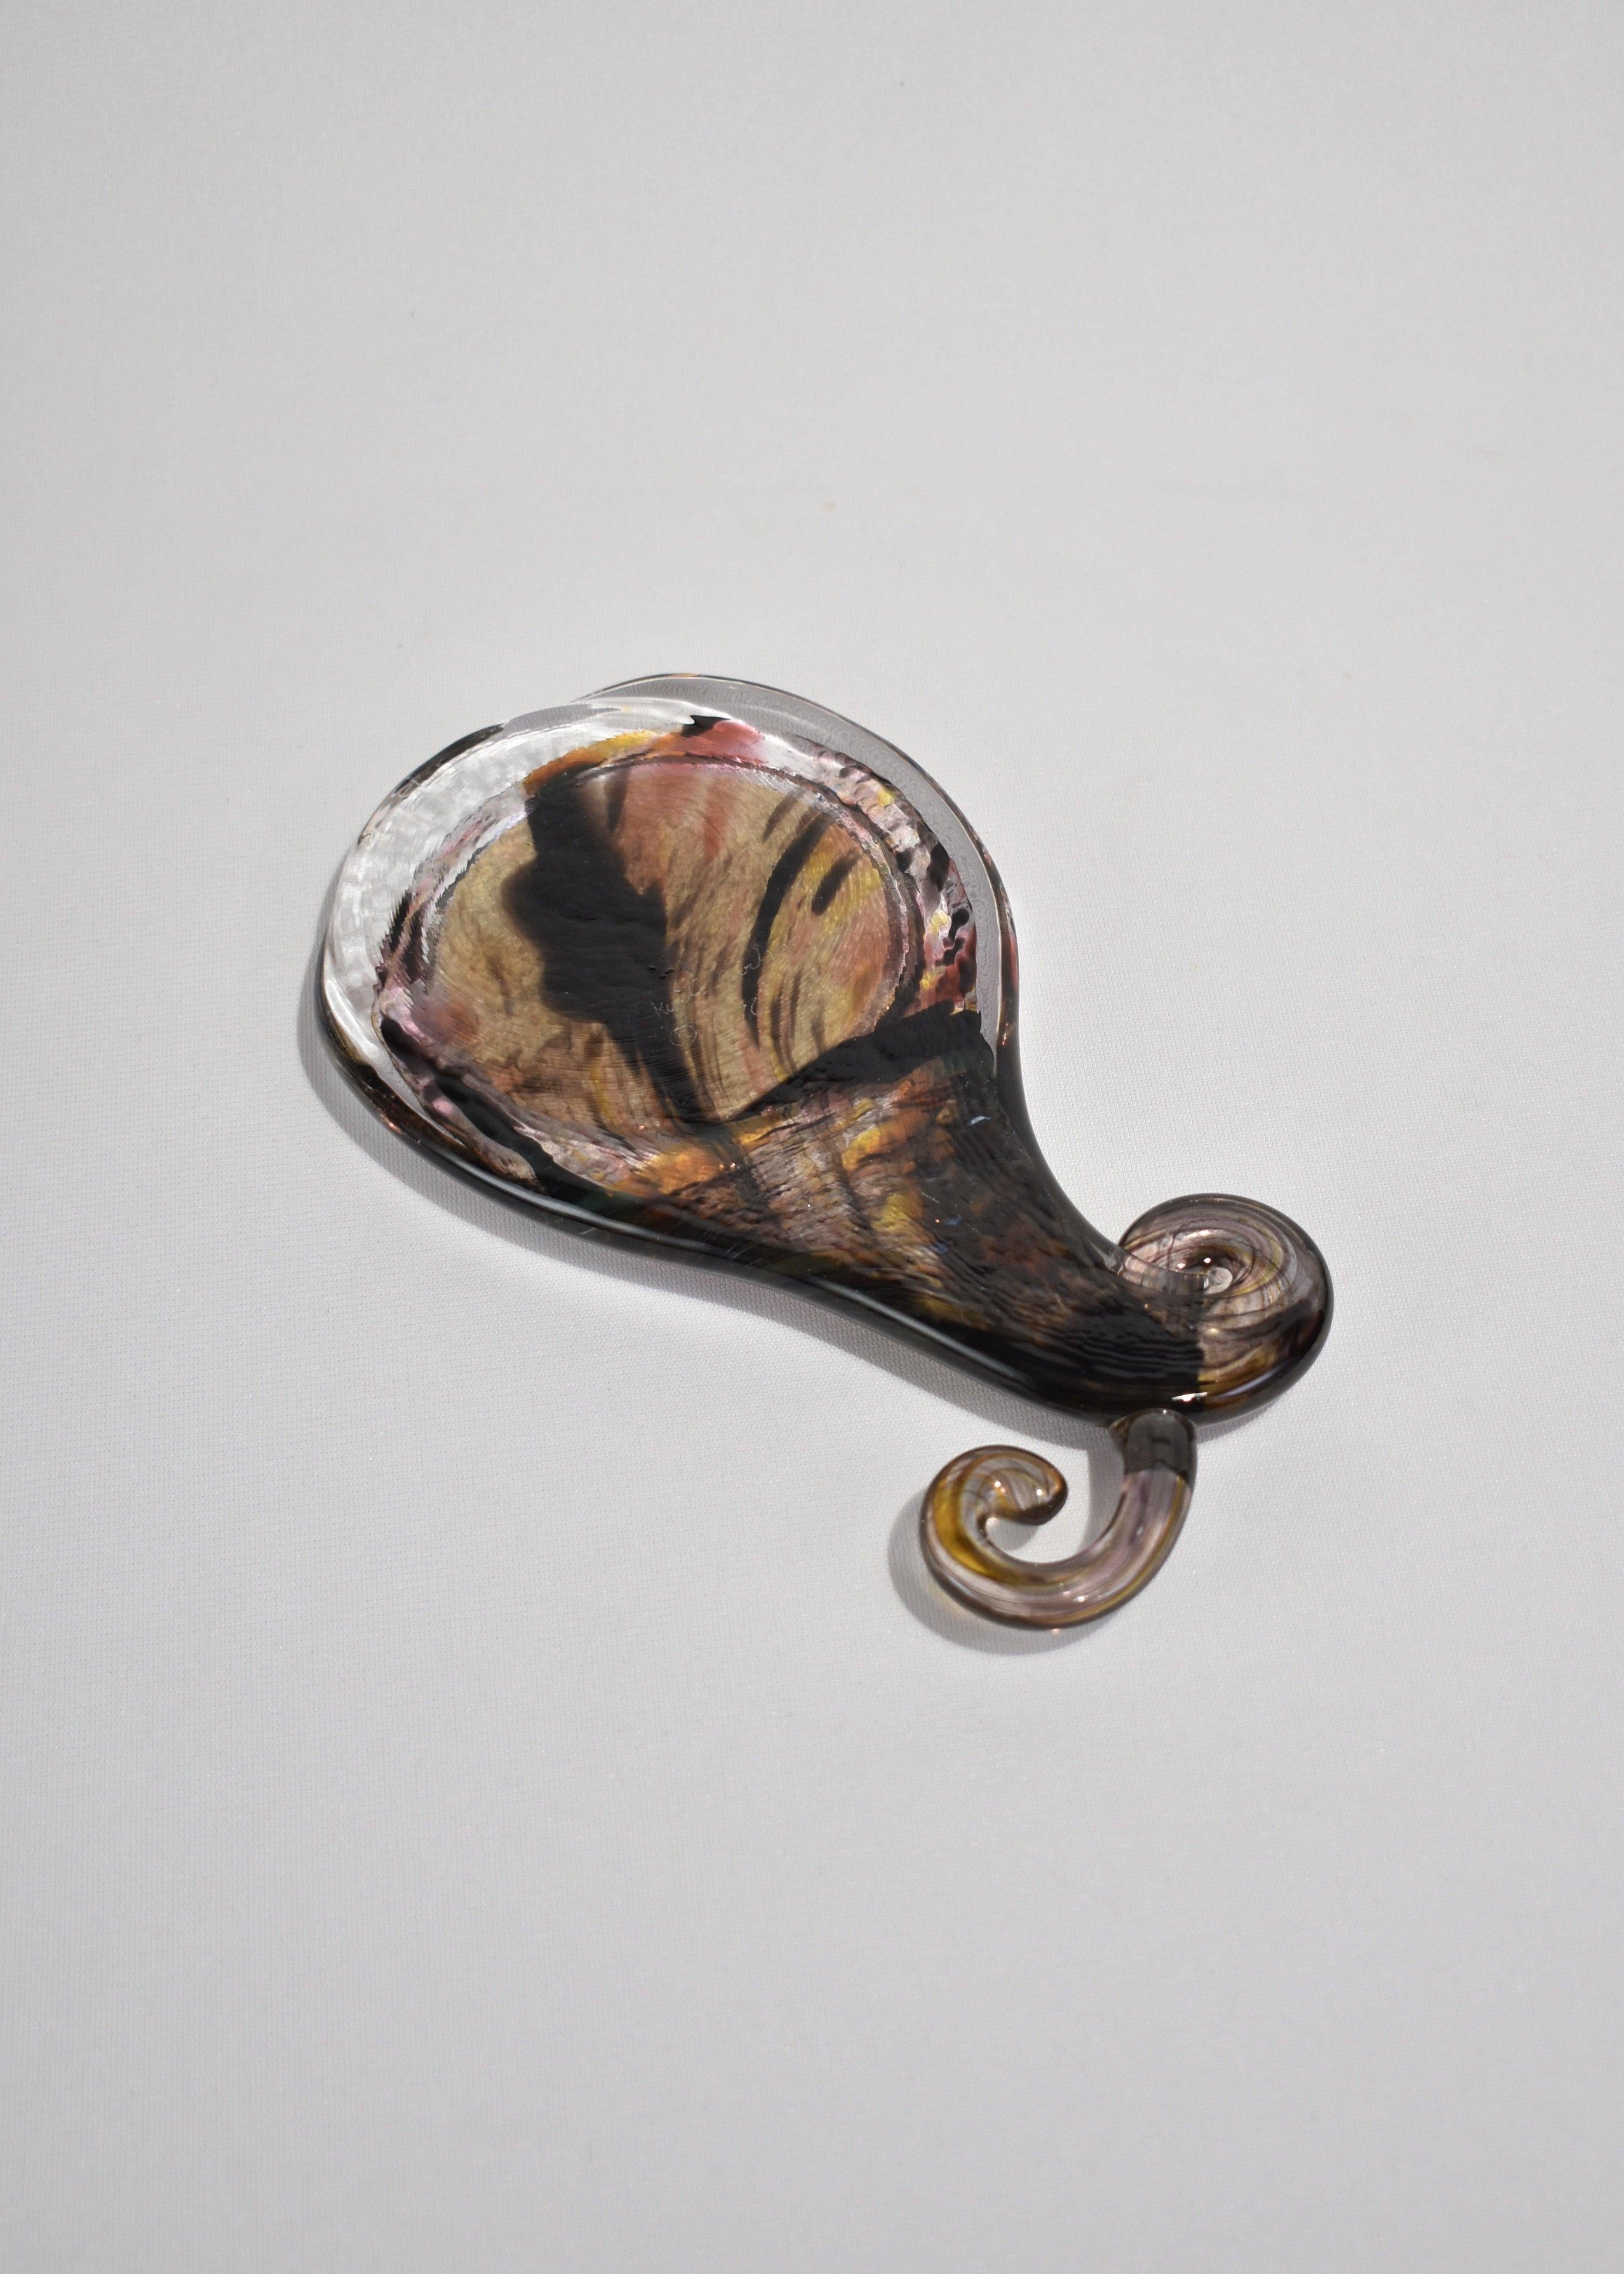 American Art Glass Hand Mirror in Blown Glass with Winding Handle